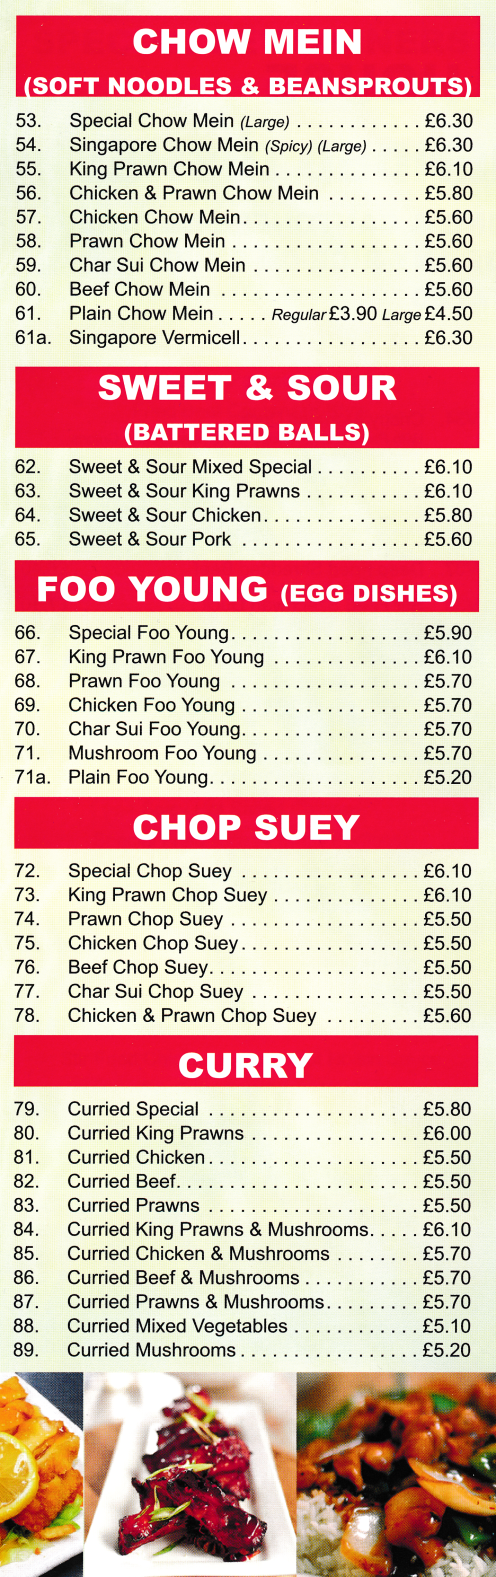 Menu for New Taste House Chinese takeaway (Chow Mein, Sweet & Sour, Foo Yung, Chop Suey and Curry dishes)